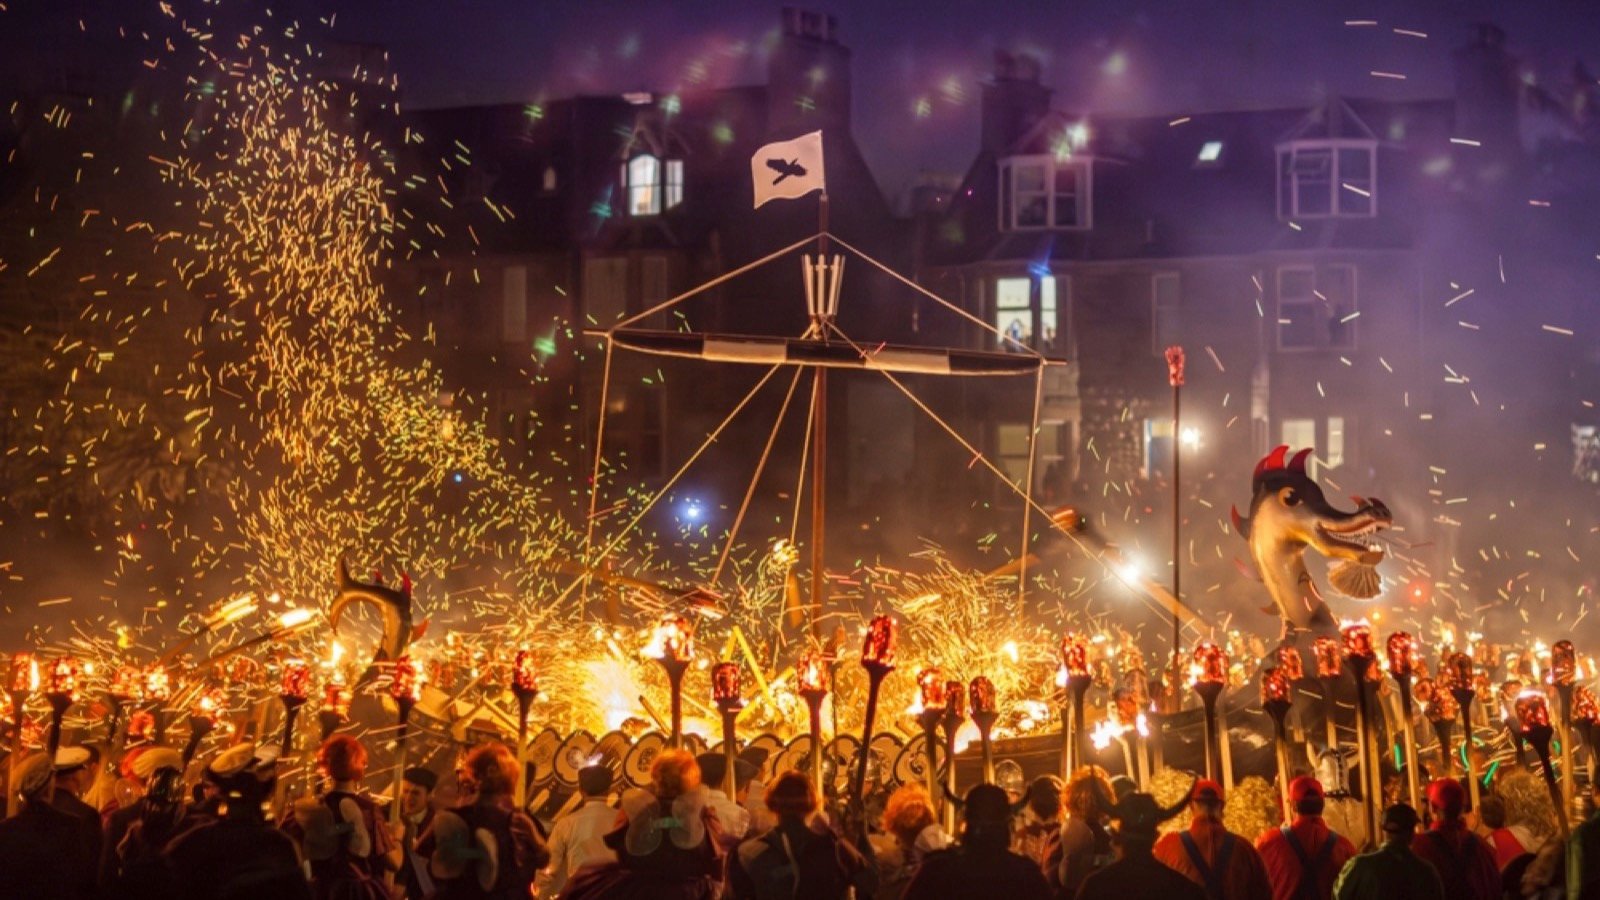 <p>Prepare to feel like a Nordic Viking during the Up Helly Aa festival in Lerwick in late January. The celebration starts off the Shetland Islands coast with a torch-lit procession, followed by a ceremonial burning of a Viking longship. The ceremony is a throwback to the ancient Nordic Heritage and is a unique cultural experience.</p>